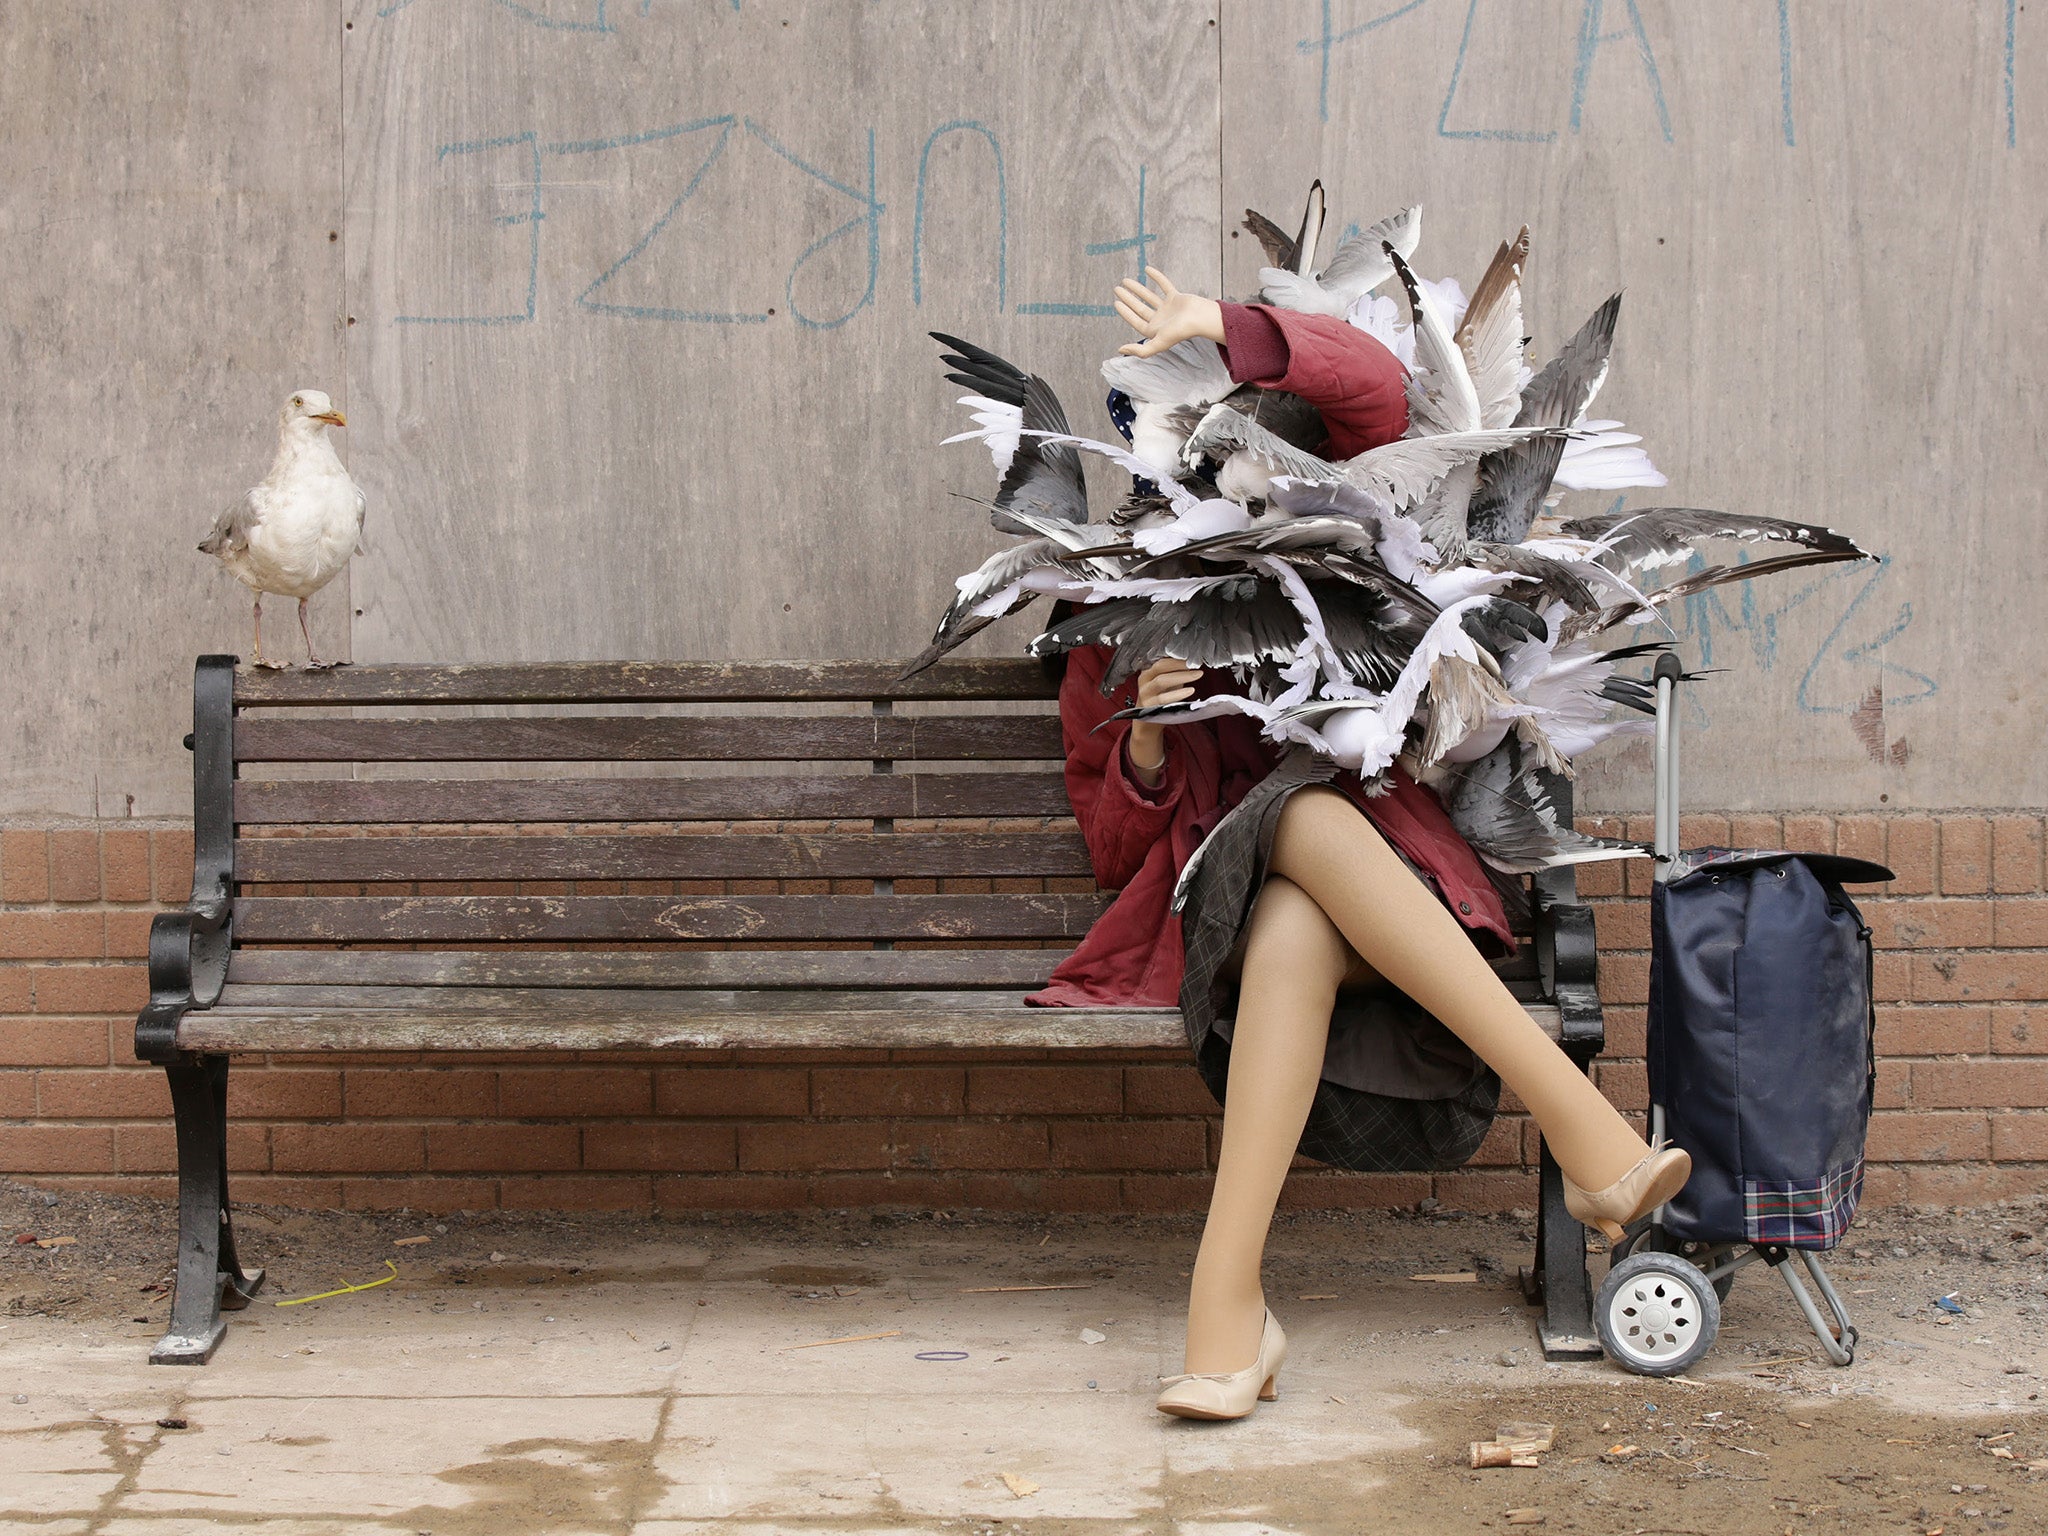 Art imitates life: a woman attacked by seagulls, by Banksy. Perhaps a little too Hitchcockian